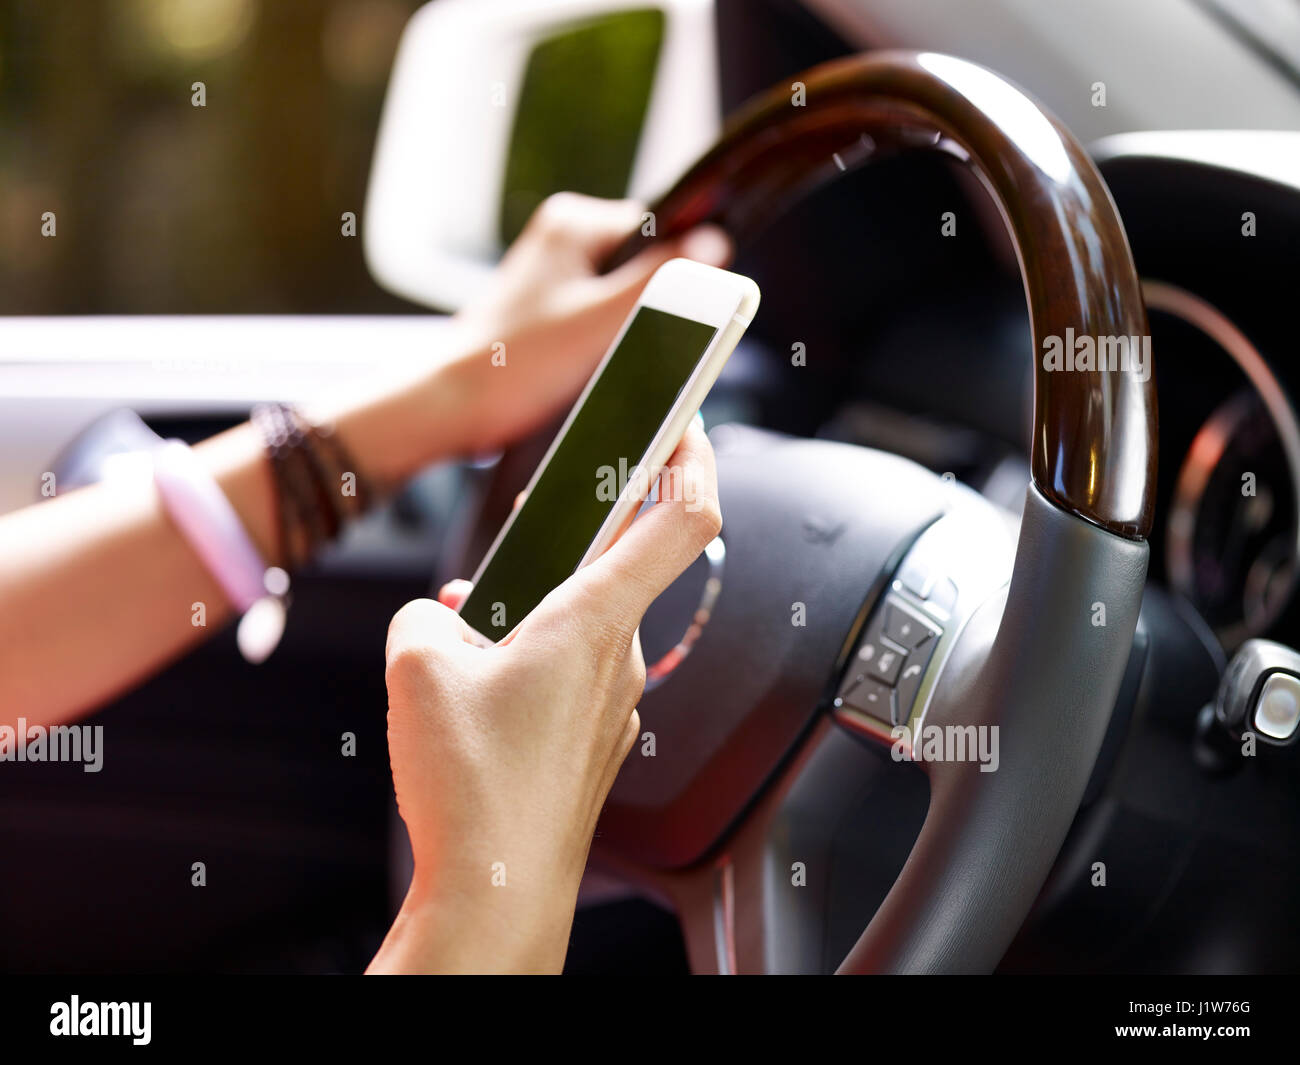 hands of female holding cellphone and steering wheel inside a vehicle. Stock Photo